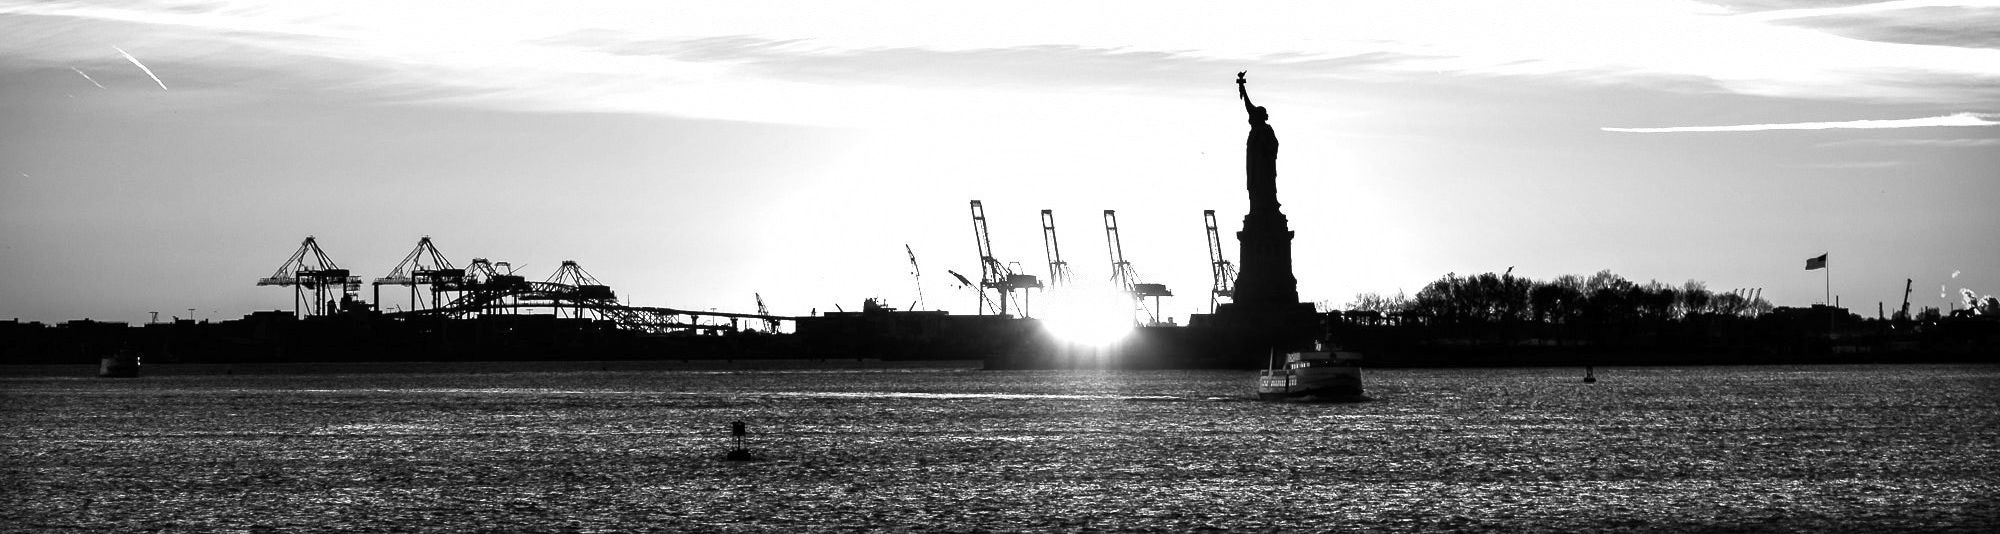 The Statue Of Liberty At Sunset New York Travel Photography 2000 web BW